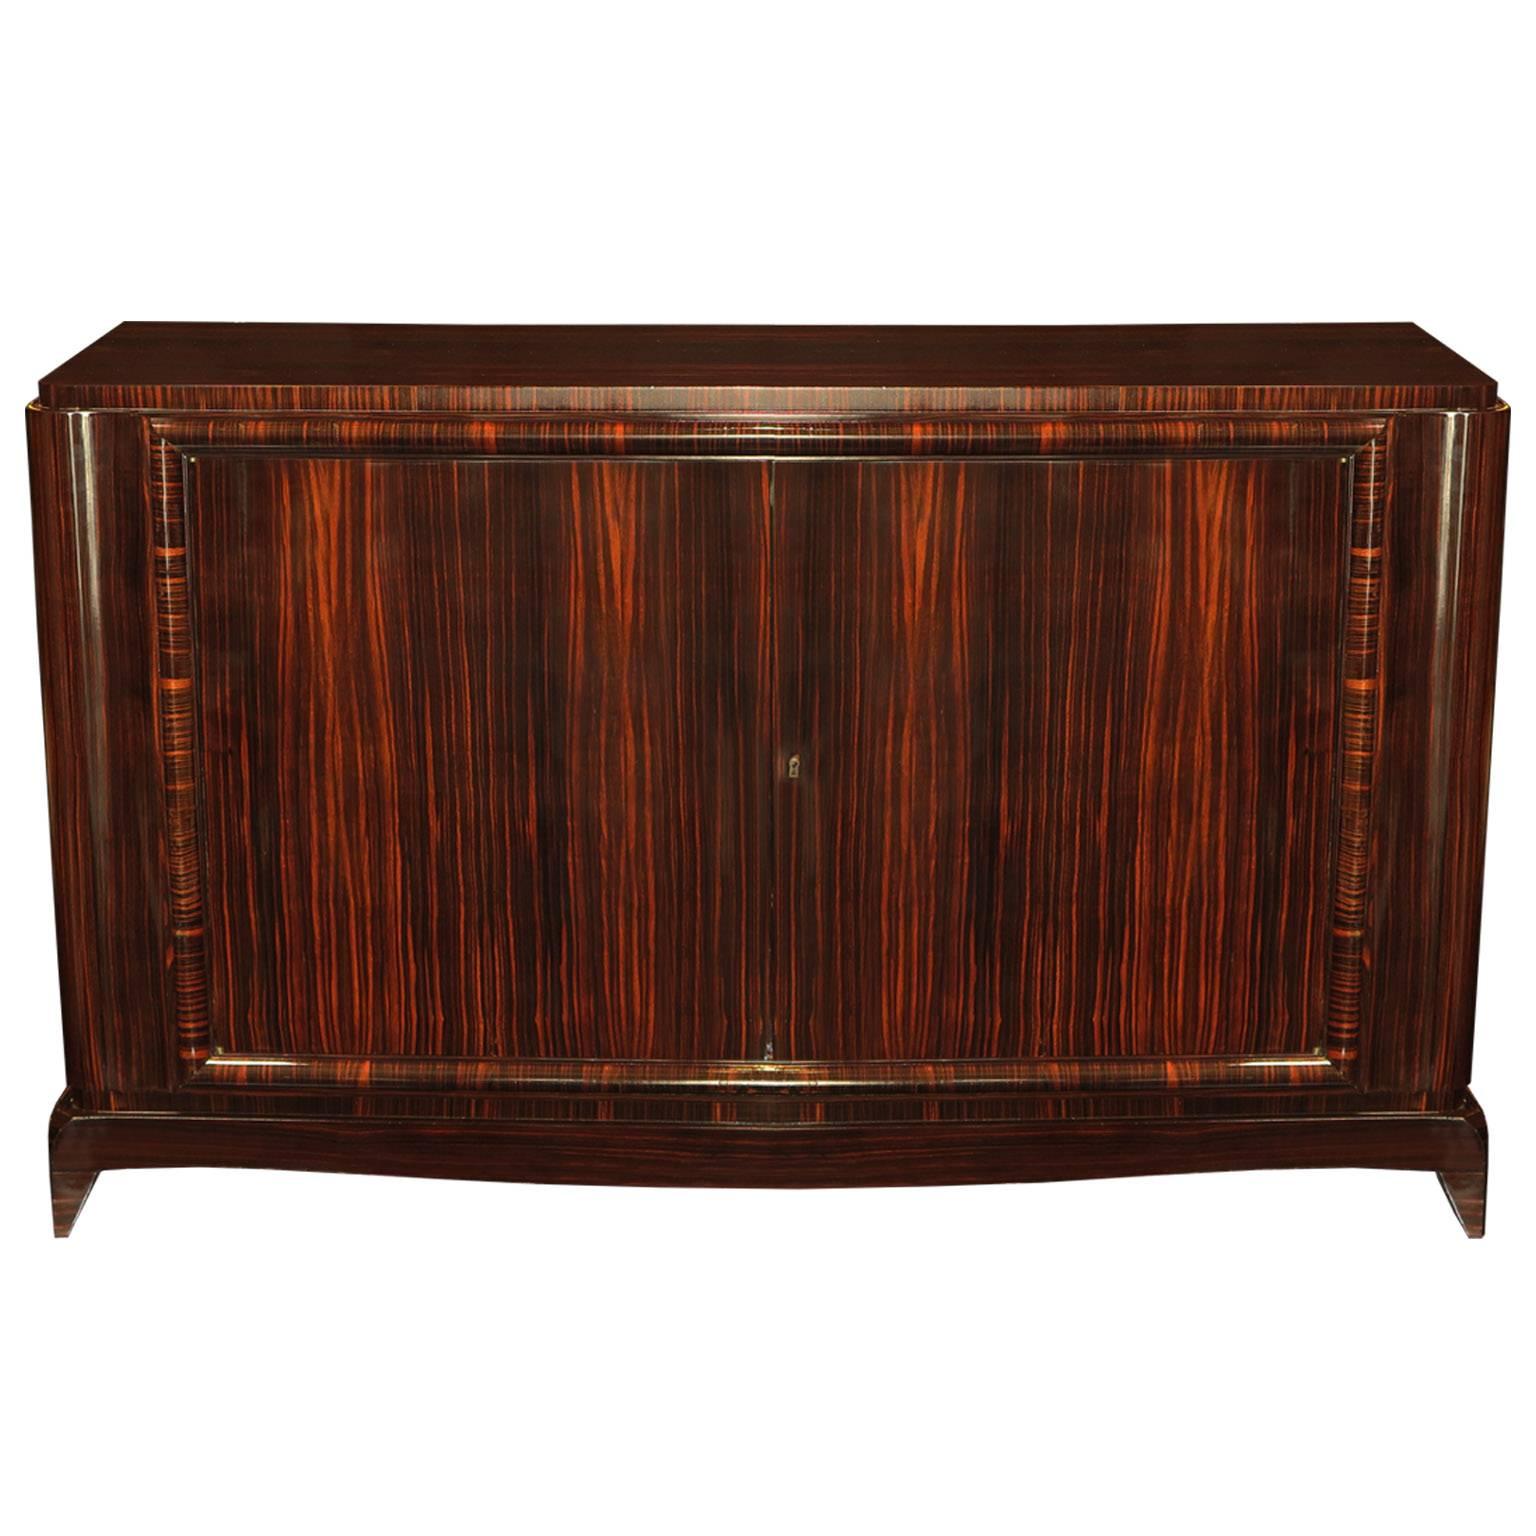 Classic pair of Art Deco sideboards exceptionally veneered in Macassar ebony. A rounded molding border decorates the outside of the ebony doors. A clean maple interior with two drawers and shelving for ample storage.